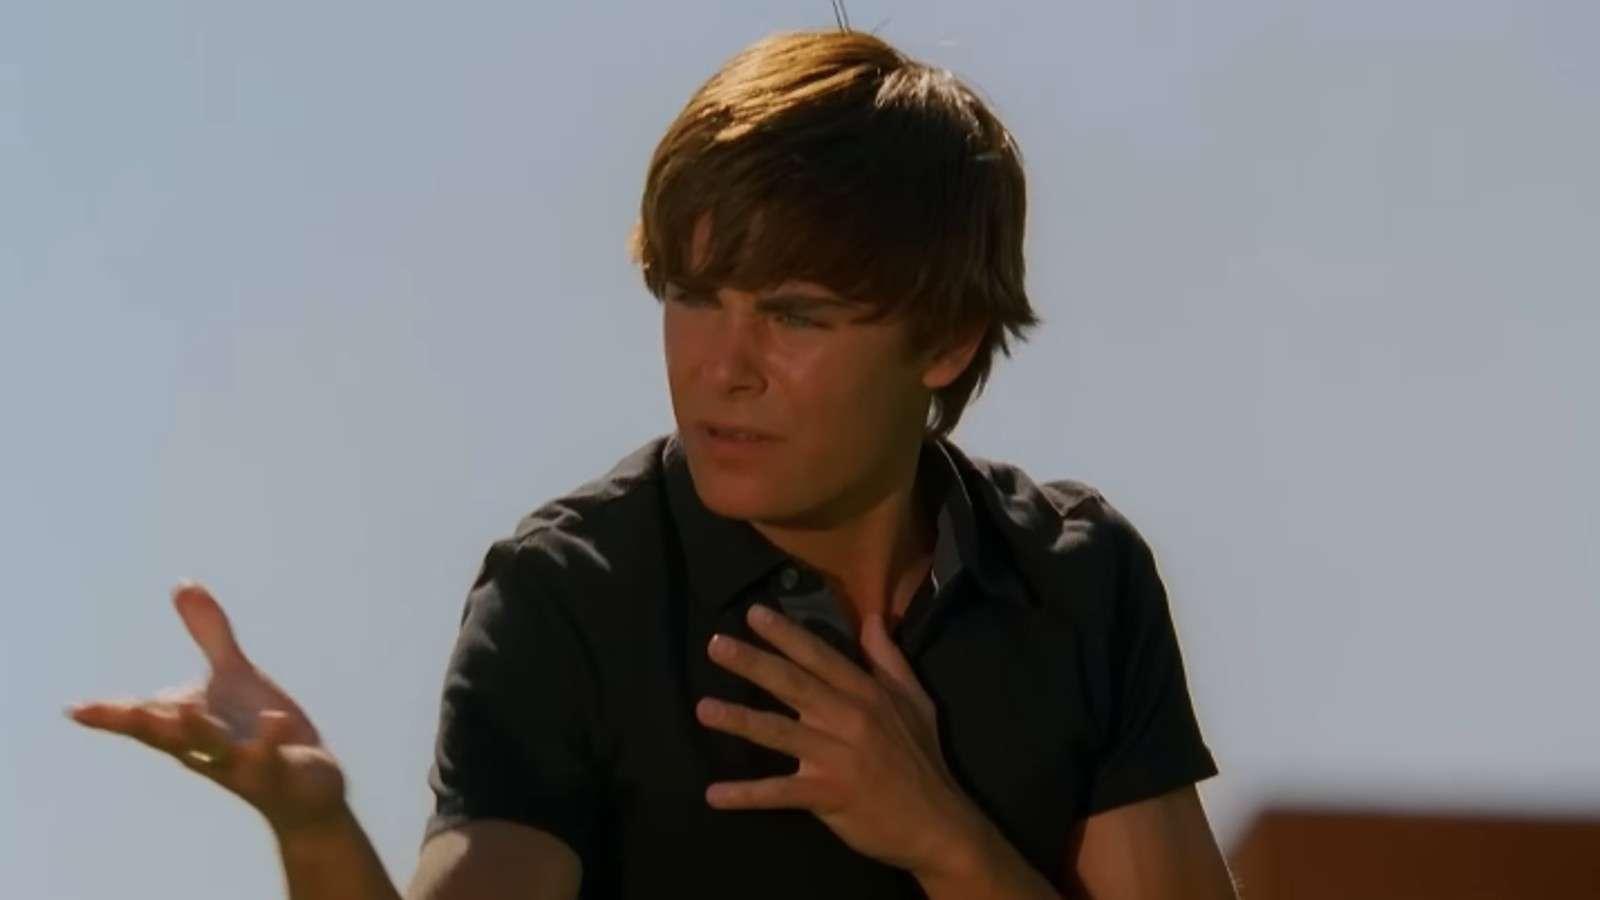 Zac Efron in High School Musical 2